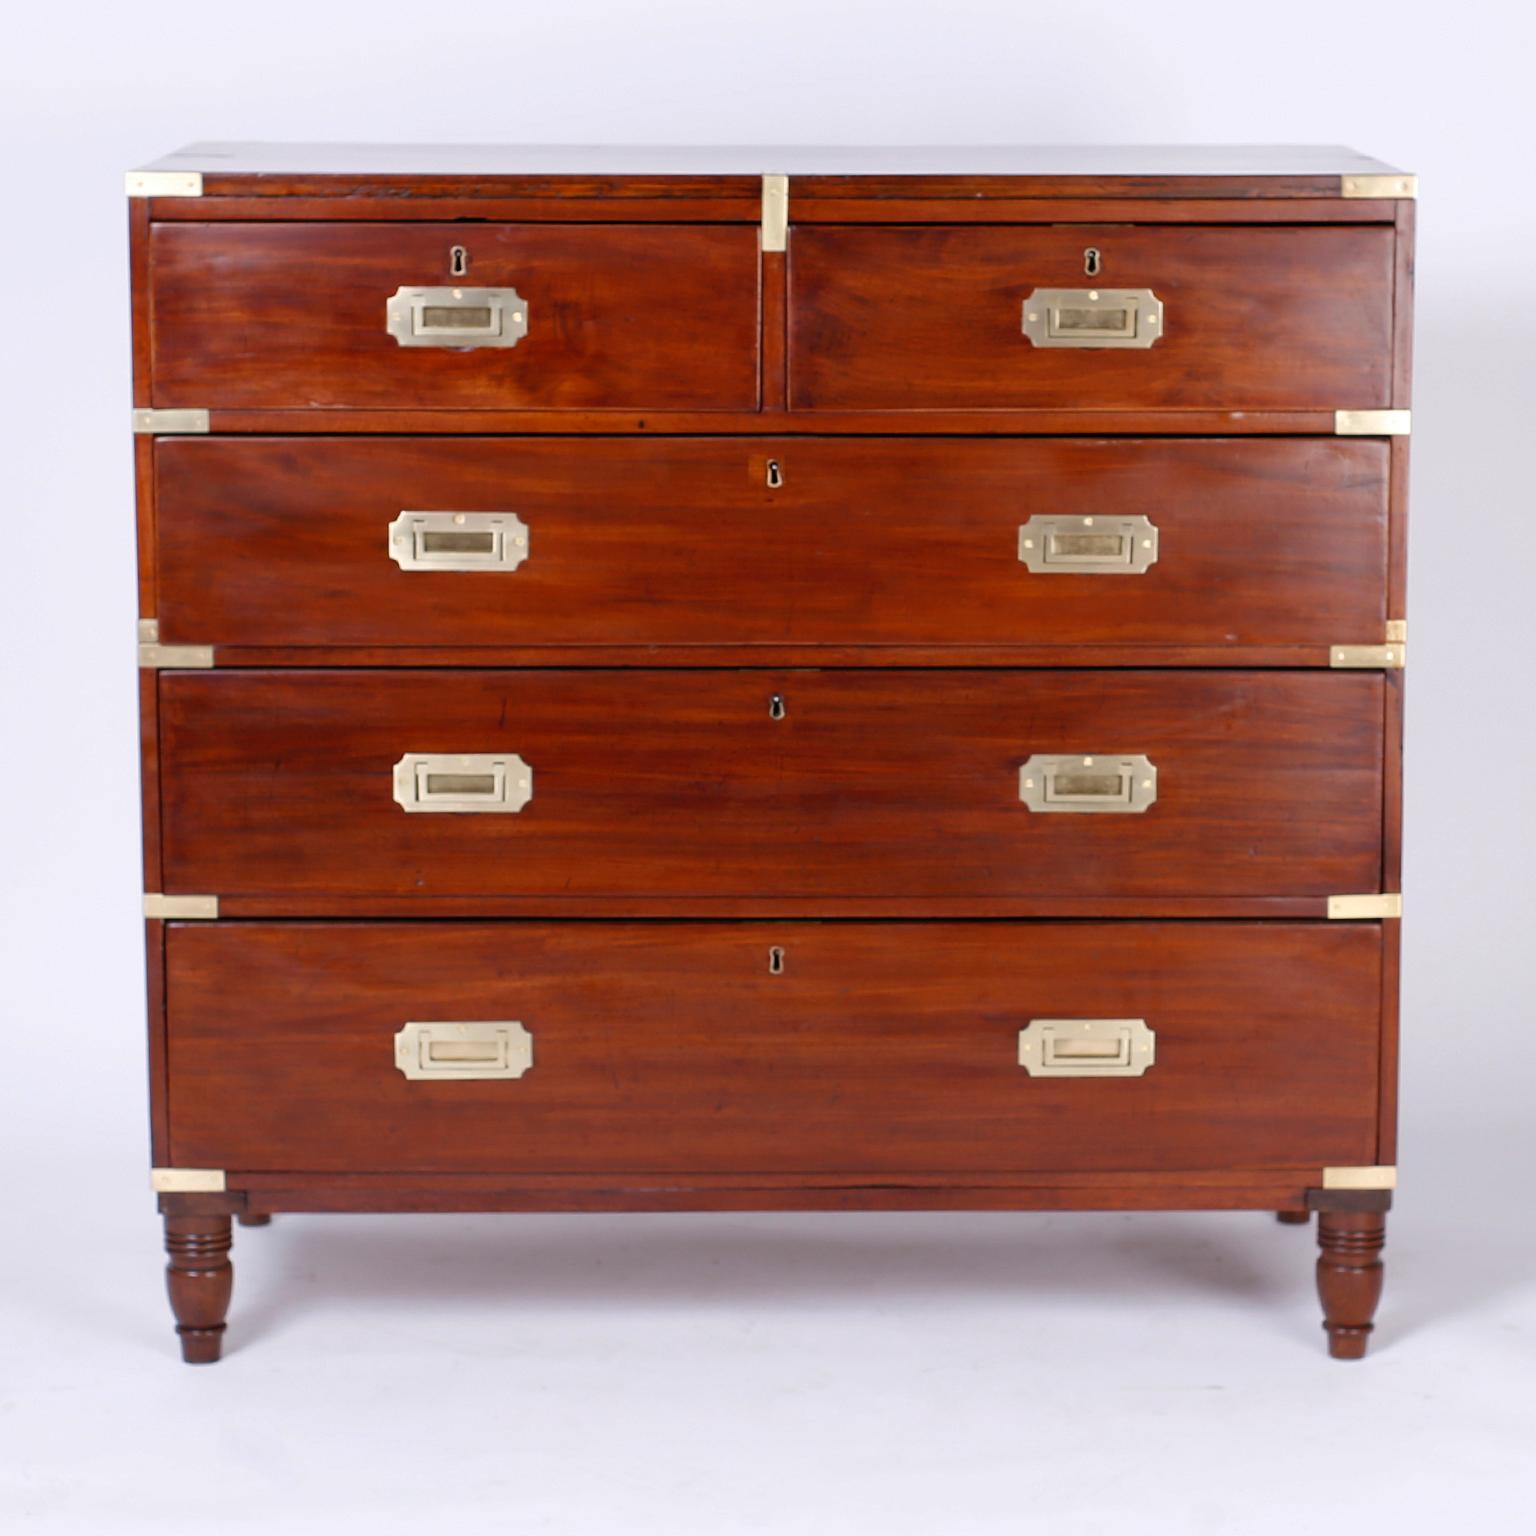 Antique British colonial 19th century English five-drawer chest handcrafted in well grained mahogany with the original brass hardware and Classic turned feet.